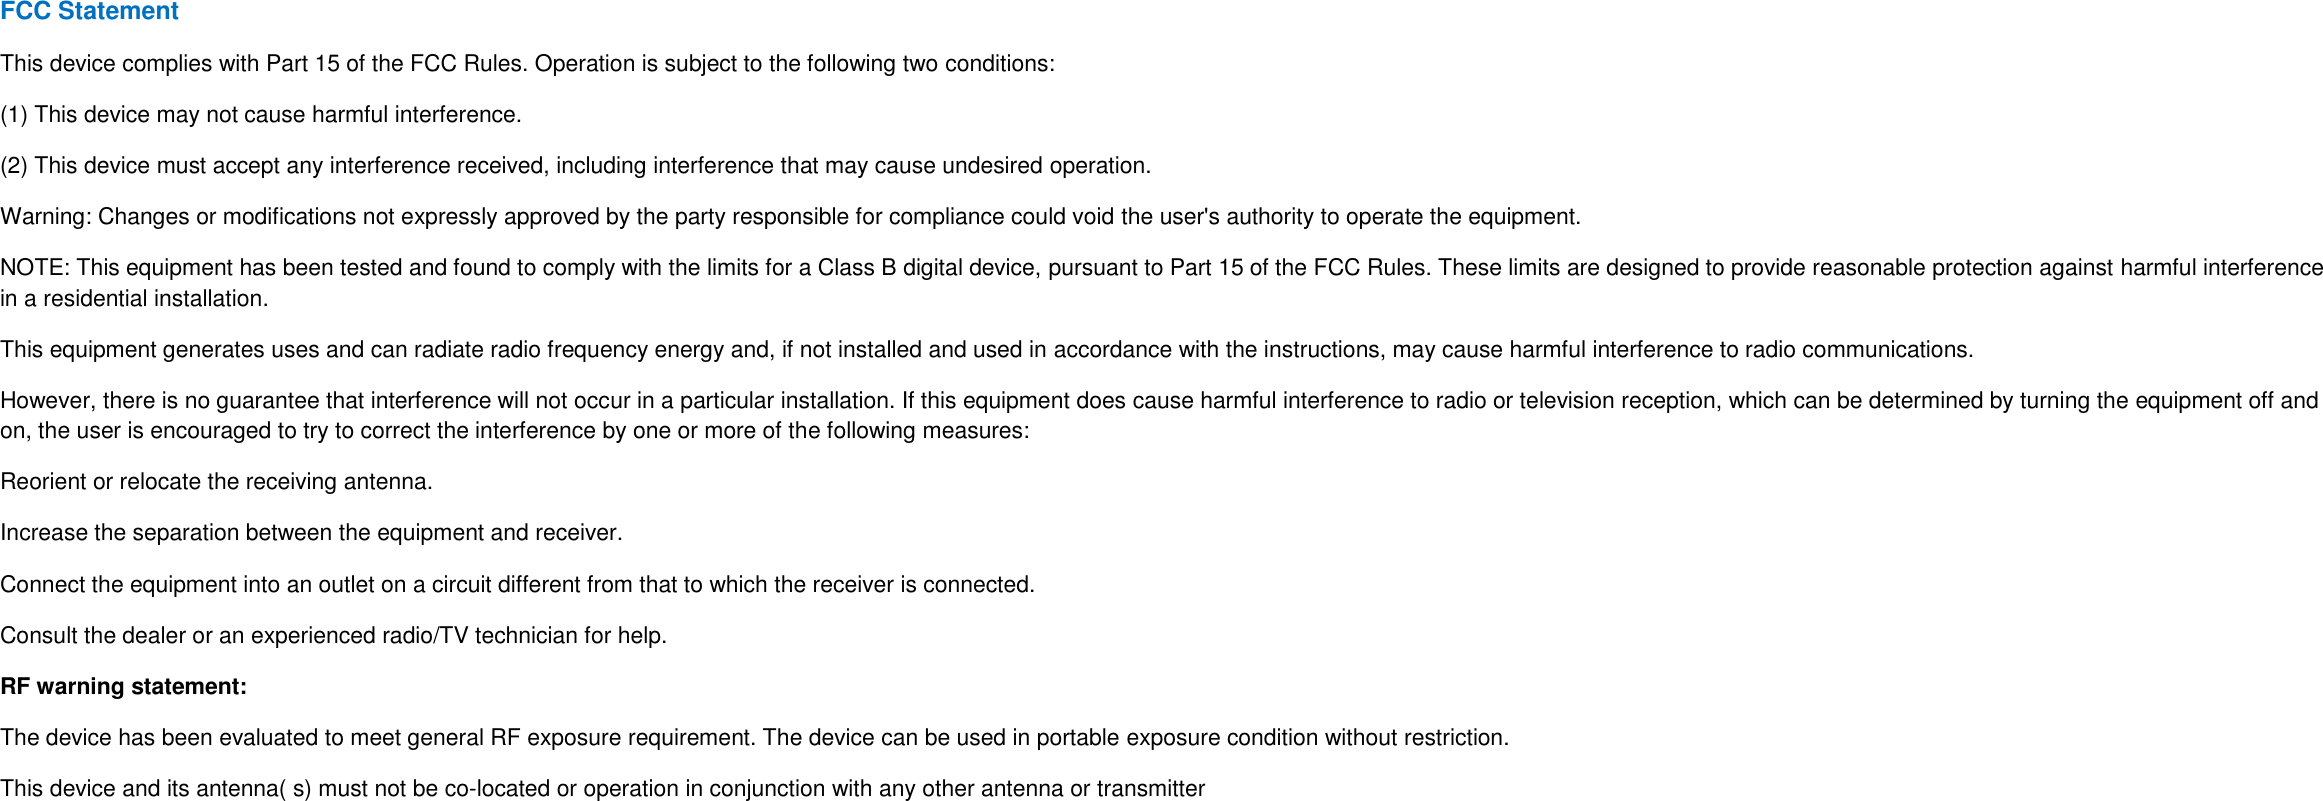 FCC Statement This device complies with Part 15 of the FCC Rules. Operation is subject to the following two conditions: (1) This device may not cause harmful interference. (2) This device must accept any interference received, including interference that may cause undesired operation. Warning: Changes or modifications not expressly approved by the party responsible for compliance could void the user&apos;s authority to operate the equipment. NOTE: This equipment has been tested and found to comply with the limits for a Class B digital device, pursuant to Part 15 of the FCC Rules. These limits are designed to provide reasonable protection against harmful interference in a residential installation. This equipment generates uses and can radiate radio frequency energy and, if not installed and used in accordance with the instructions, may cause harmful interference to radio communications. However, there is no guarantee that interference will not occur in a particular installation. If this equipment does cause harmful interference to radio or television reception, which can be determined by turning the equipment off and on, the user is encouraged to try to correct the interference by one or more of the following measures: Reorient or relocate the receiving antenna. Increase the separation between the equipment and receiver. Connect the equipment into an outlet on a circuit different from that to which the receiver is connected. Consult the dealer or an experienced radio/TV technician for help. RF warning statement: The device has been evaluated to meet general RF exposure requirement. The device can be used in portable exposure condition without restriction. This device and its antenna( s) must not be co-located or operation in conjunction with any other antenna or transmitter  